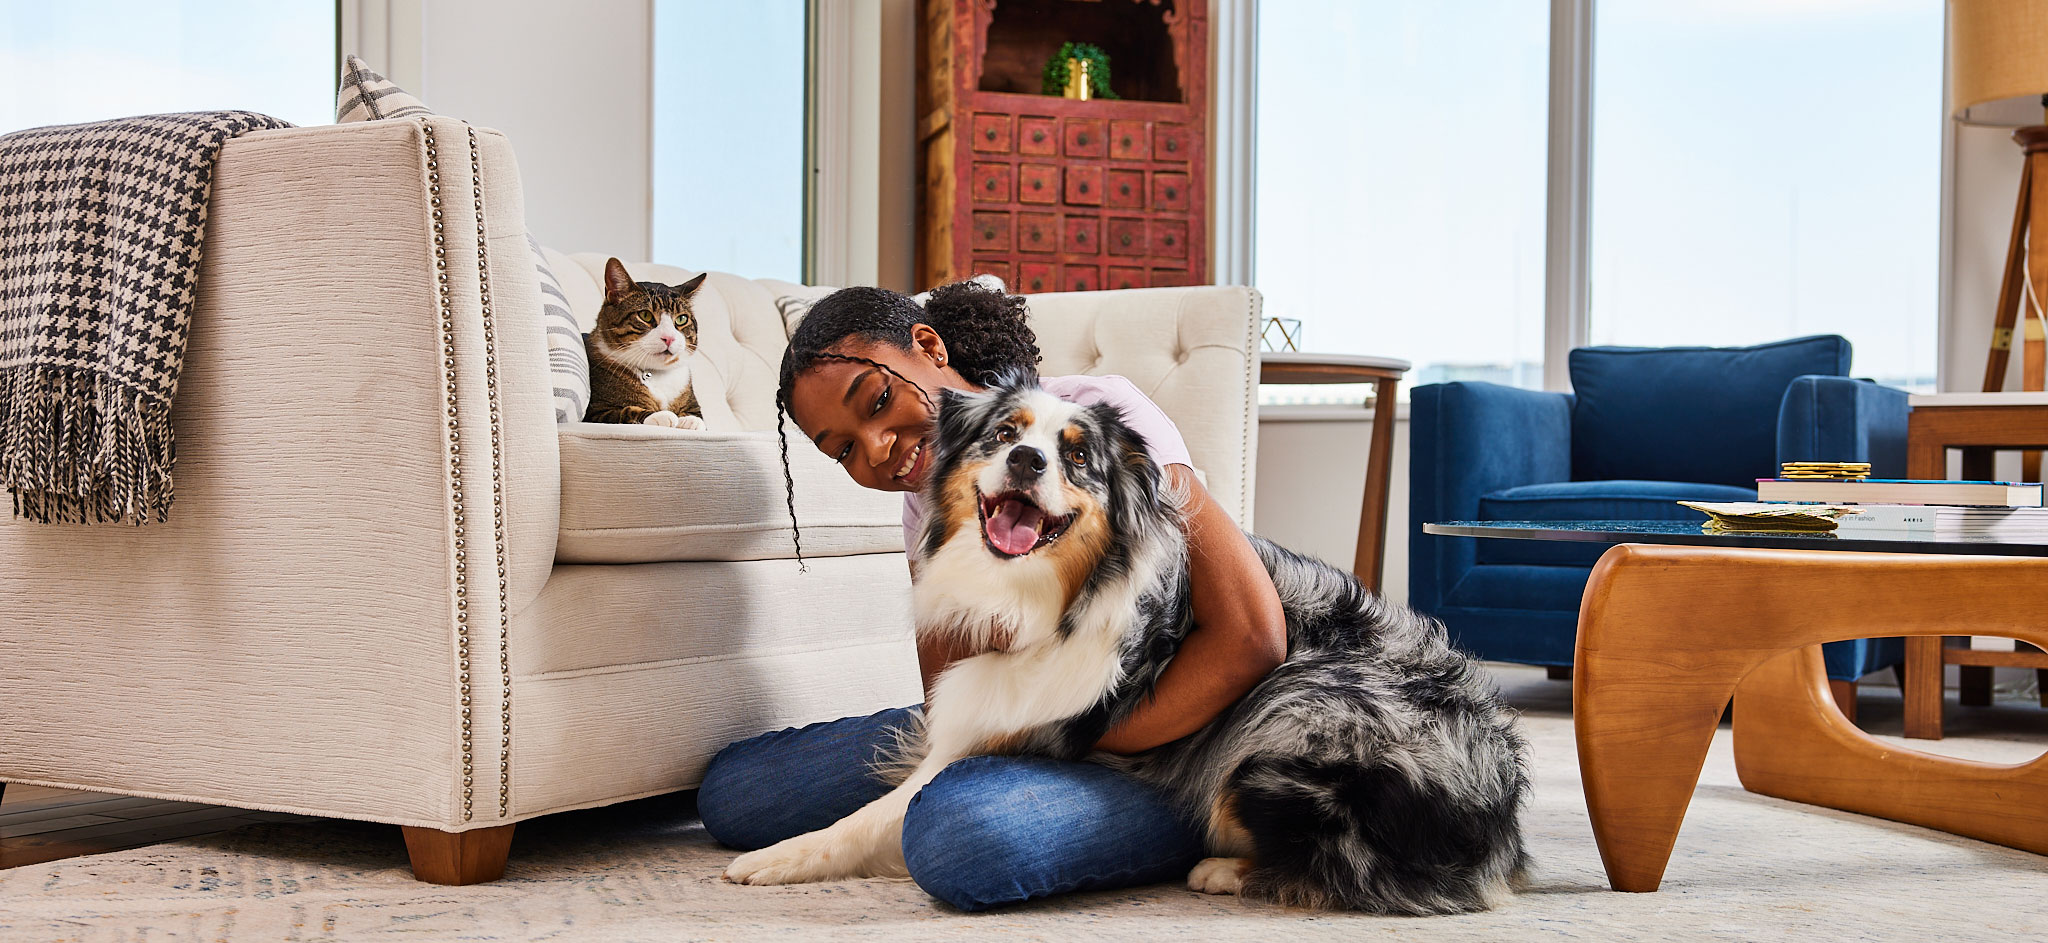 Working with our team of veterinarians, animal nutritionists, and food scientists, Wellness® achieves a steadfast focus of supporting a pet’s wellbeing by upholding our Wellness Nutritional Philosophy. 